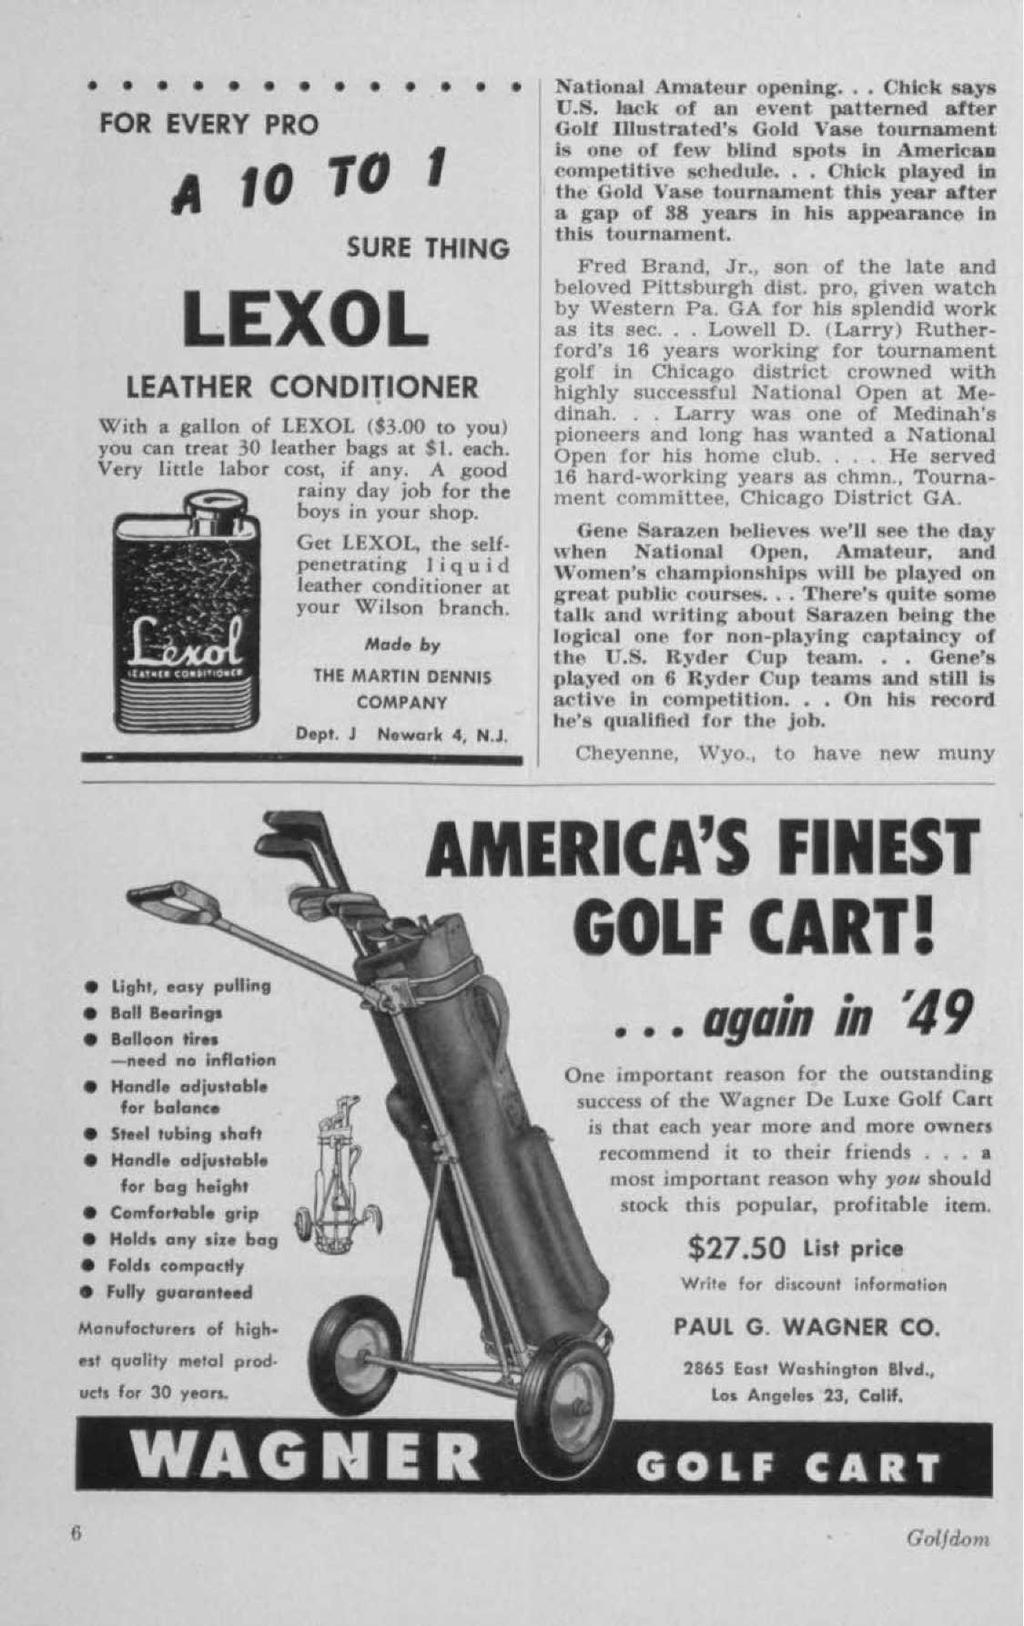 FOR EVERY PRO A 10 1TO 1 SURE THING LEXOL LEATHER CONDITIONER With a gallon of LEXOL ($3.00 to you) you can treat 30 leather hags at SI, each. Very little labor cost, if any.